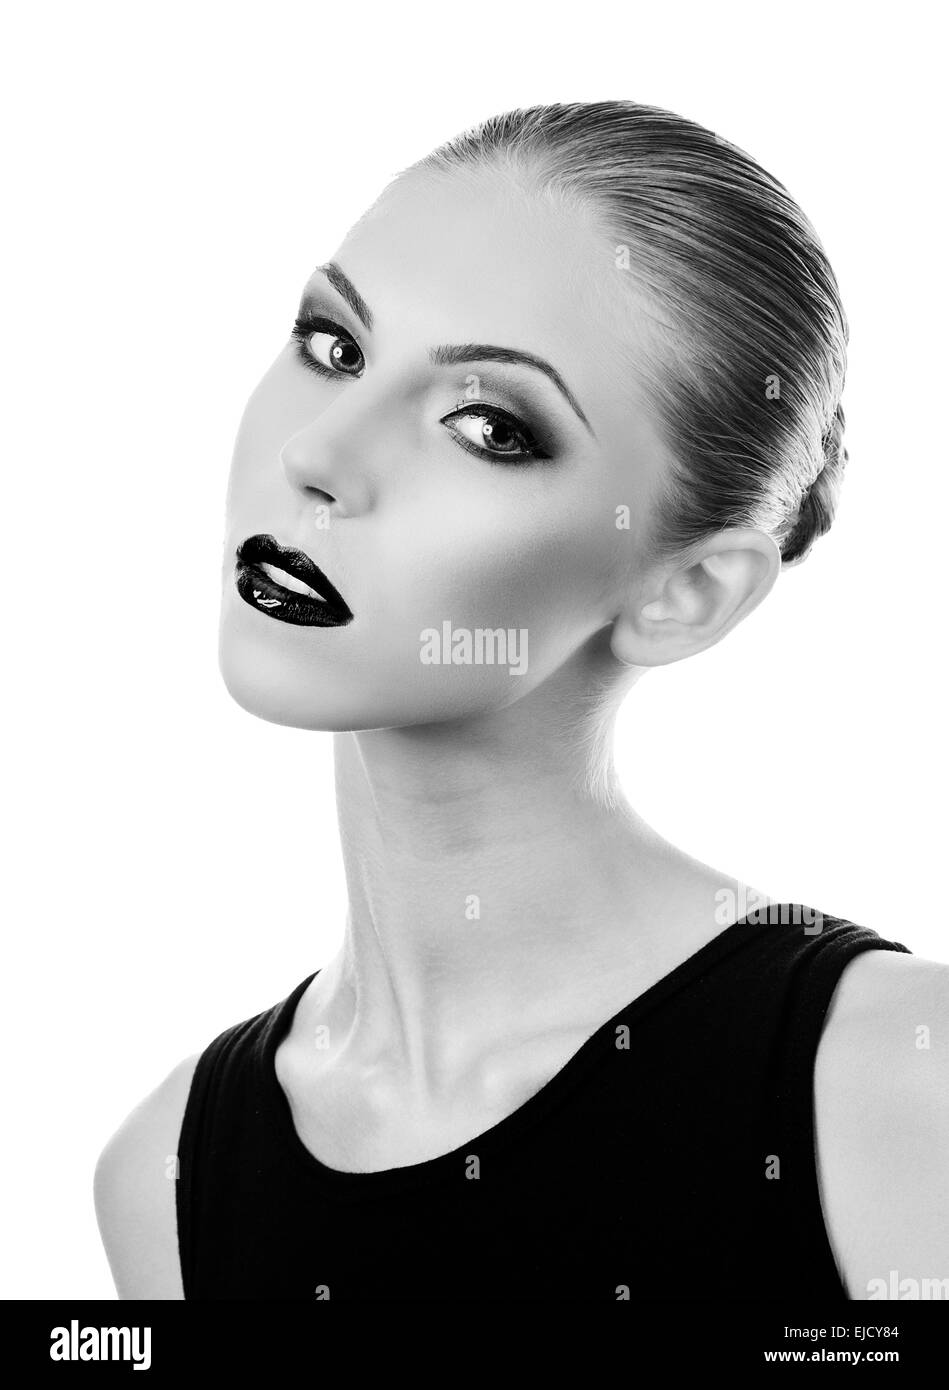 Professional Make up concept Stock Photo